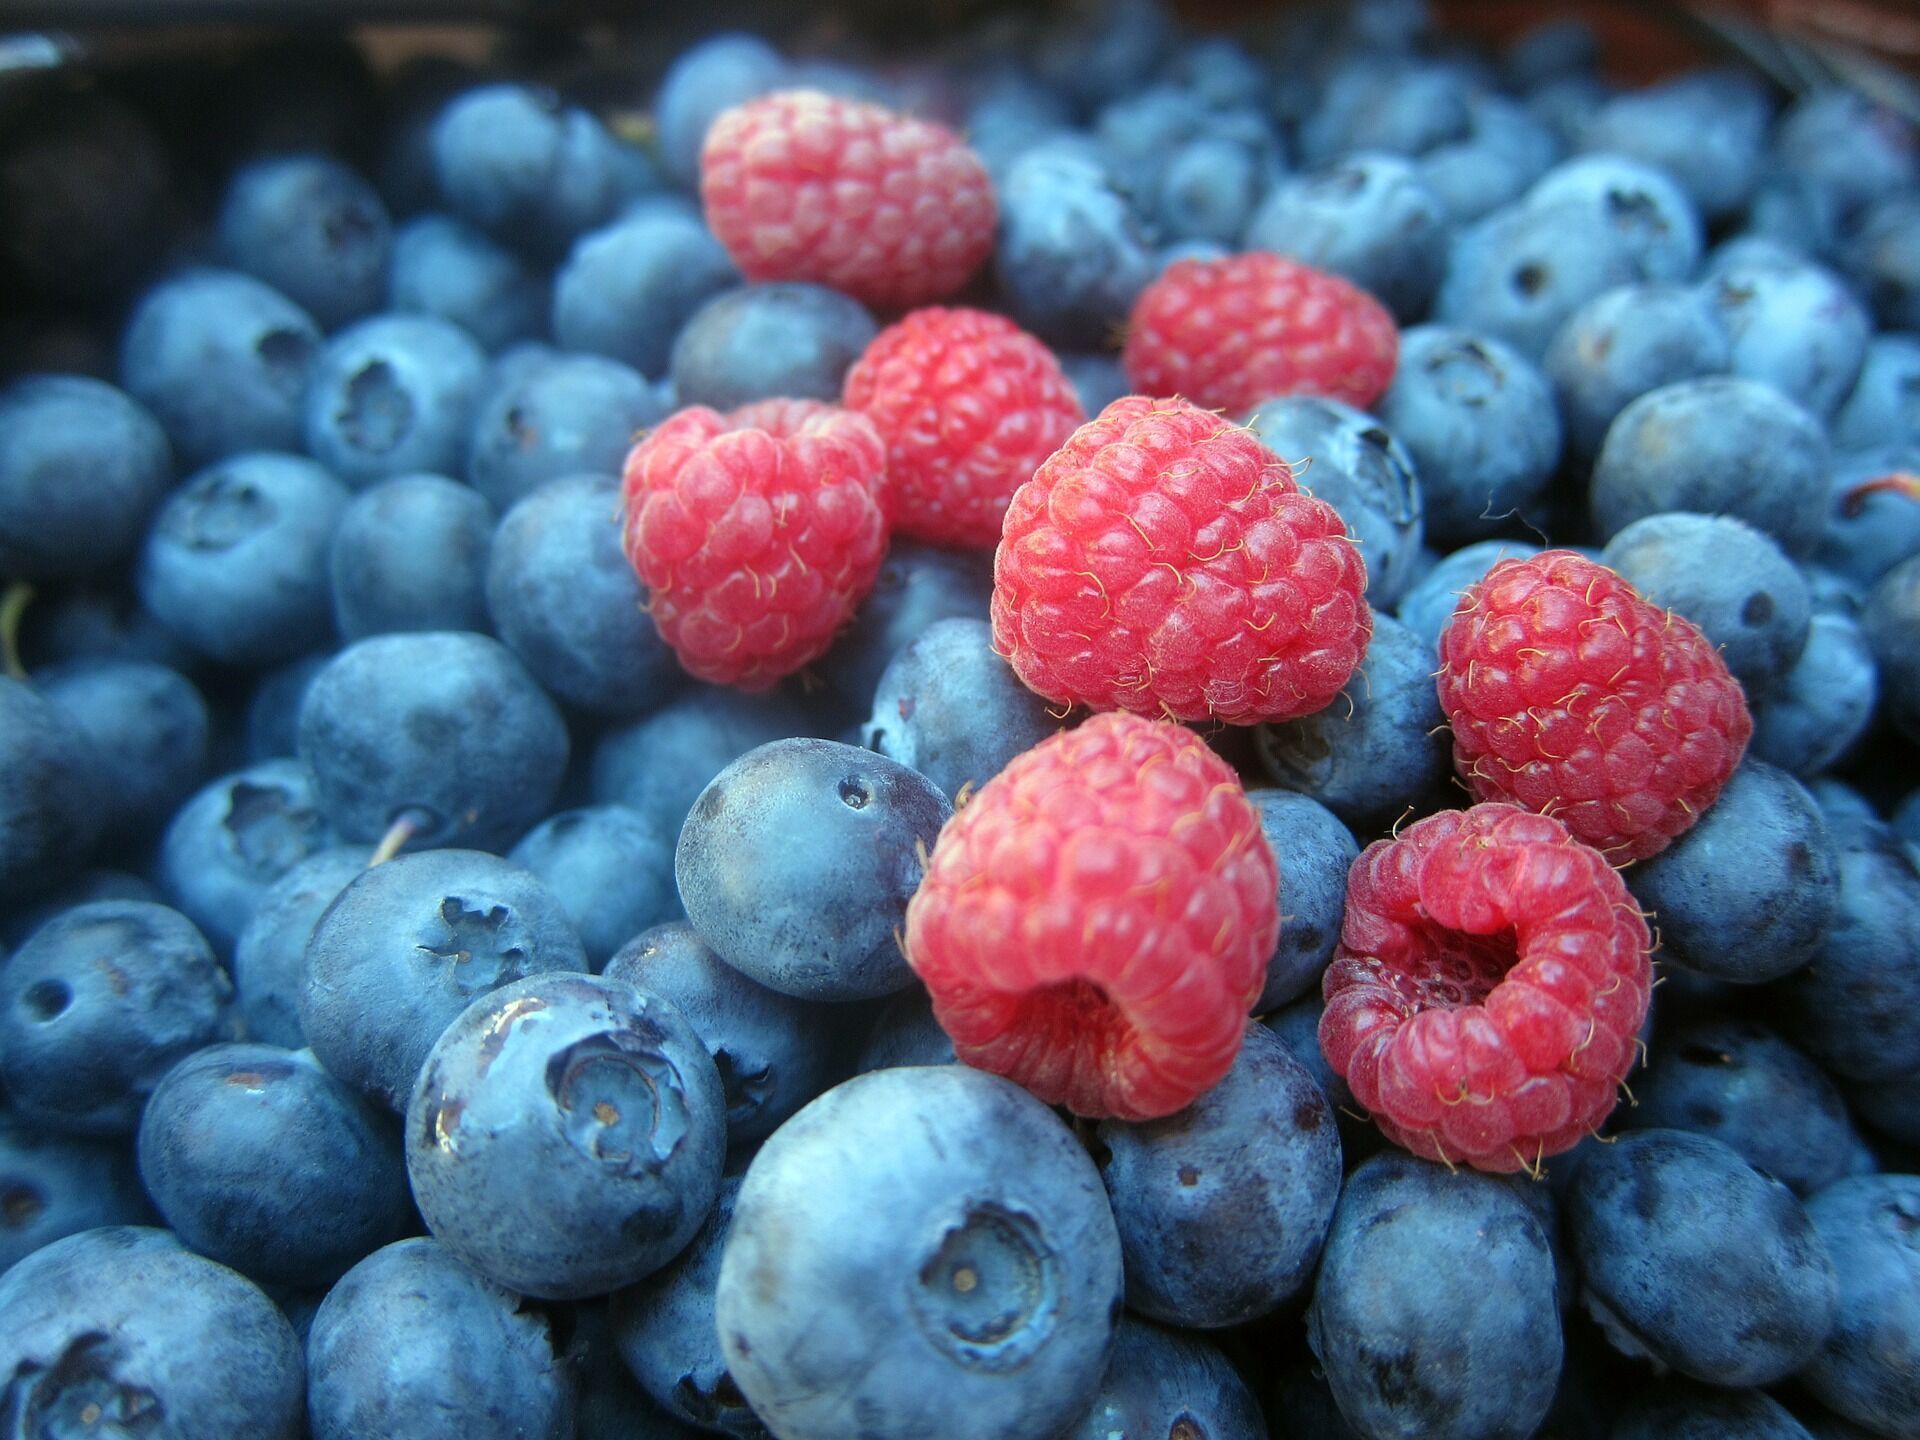 Ukraine has earned hundreds of millions of dollars from fruit and berry exports